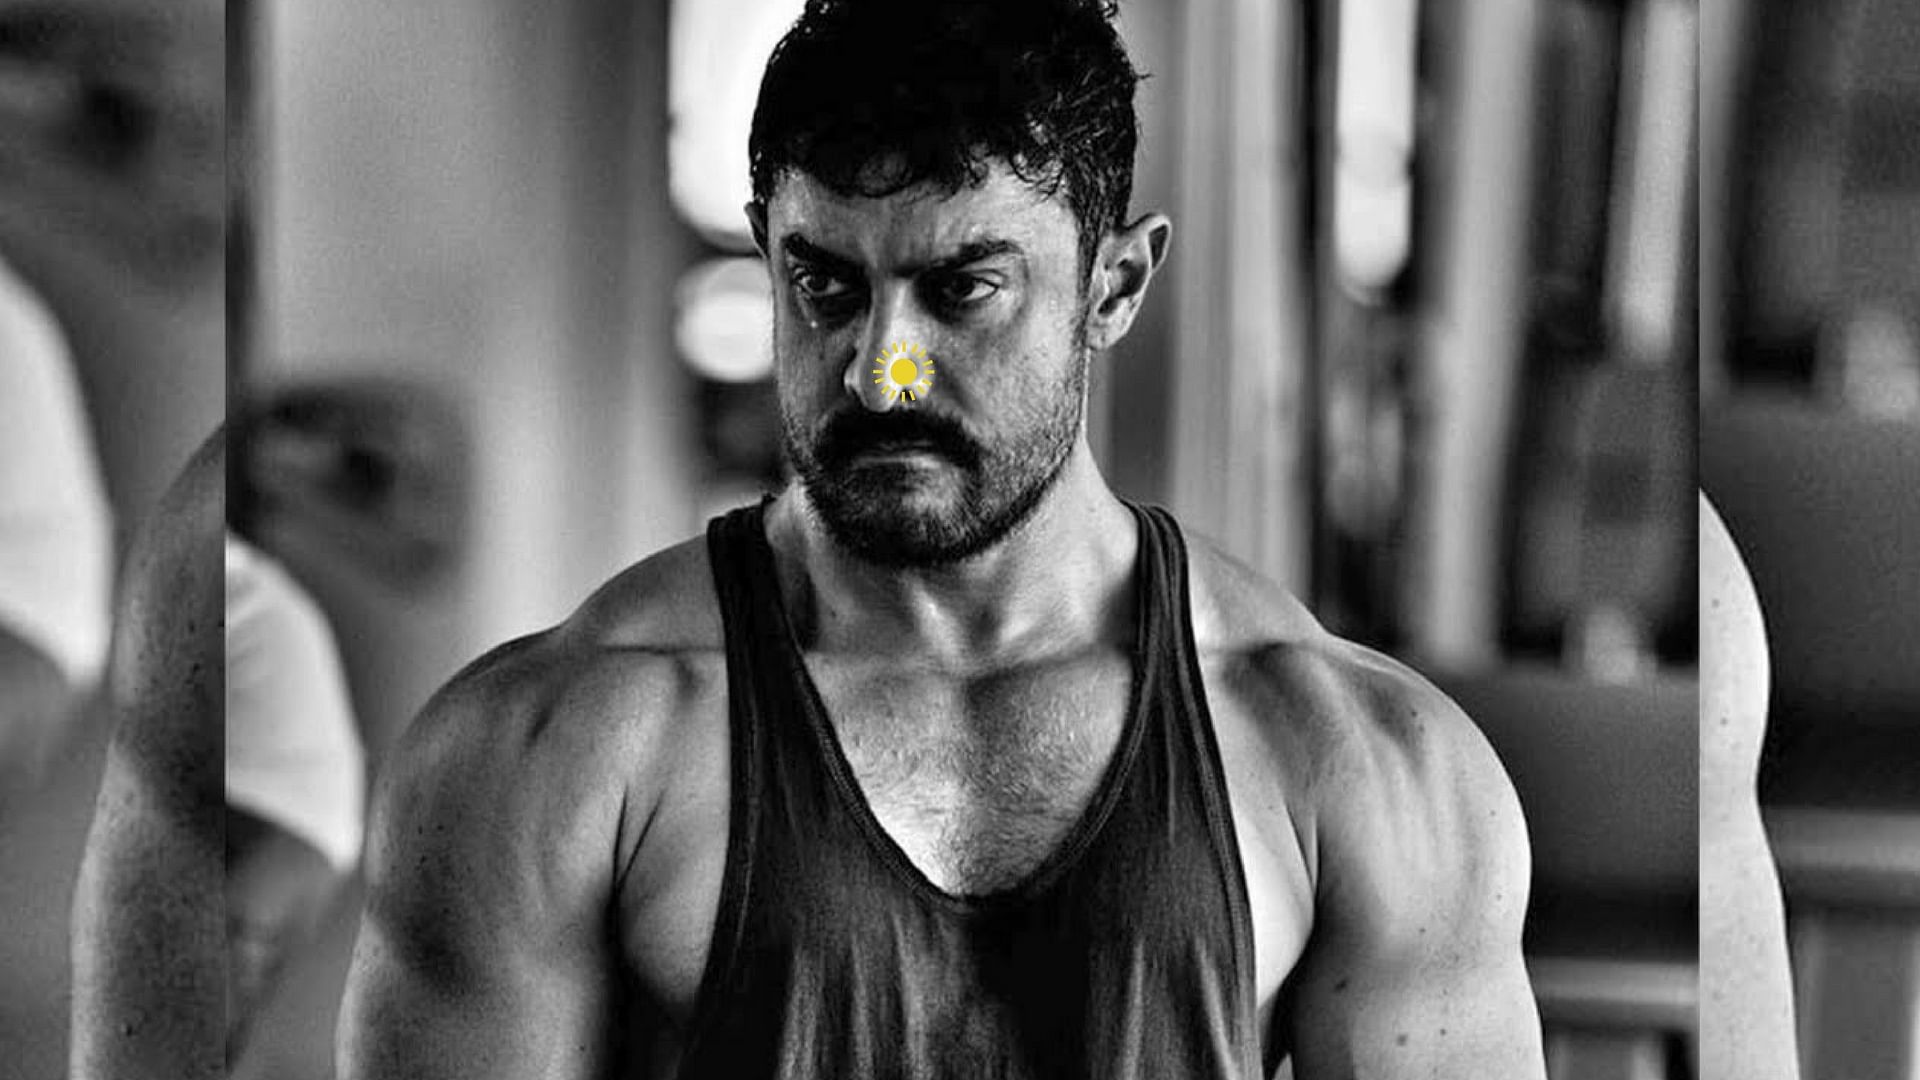 Is Aamir Khan’s new nose pin look for his next film <i>Thugs of Hindostan</i>? (Photo courtesy: UTV Motion Pictures; altered by The Quint)